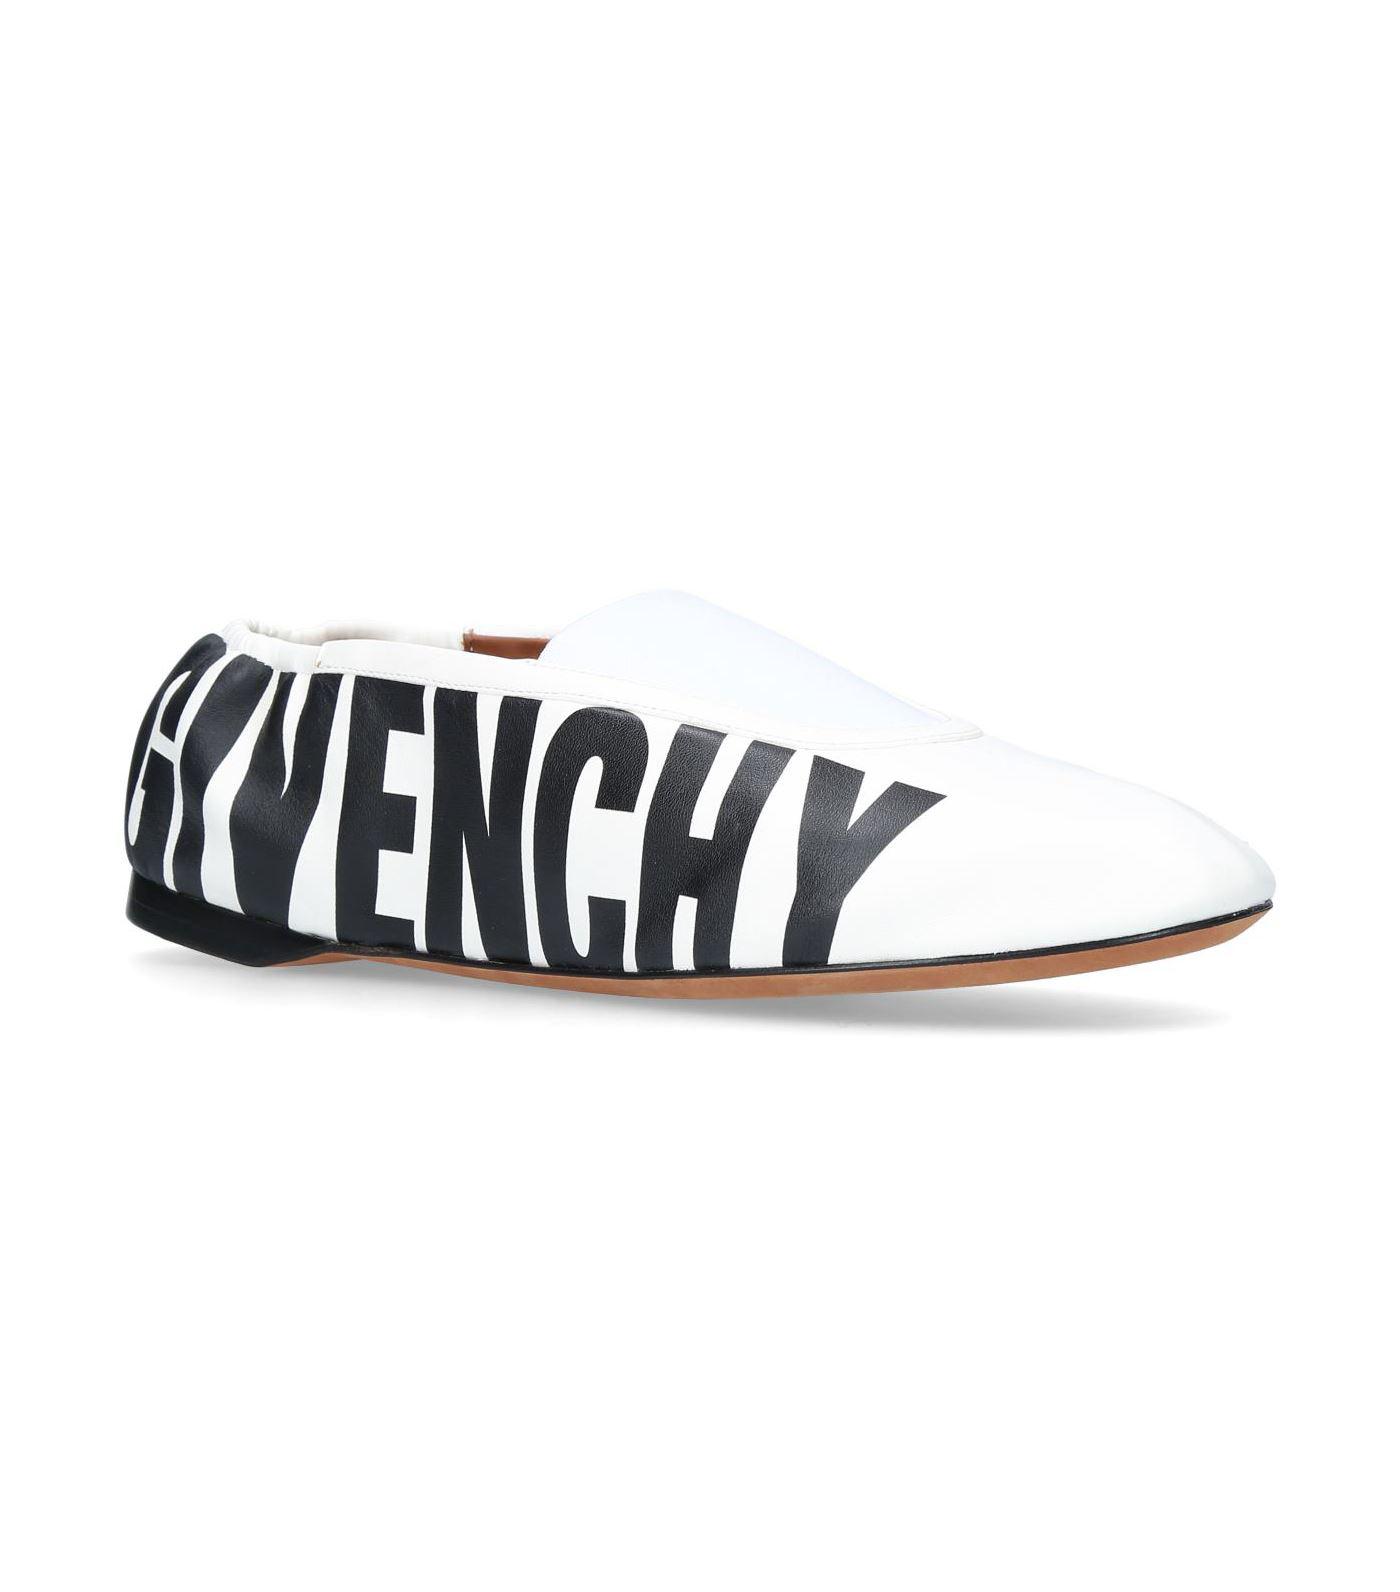 Givenchy Rivington Elasticated Leather 